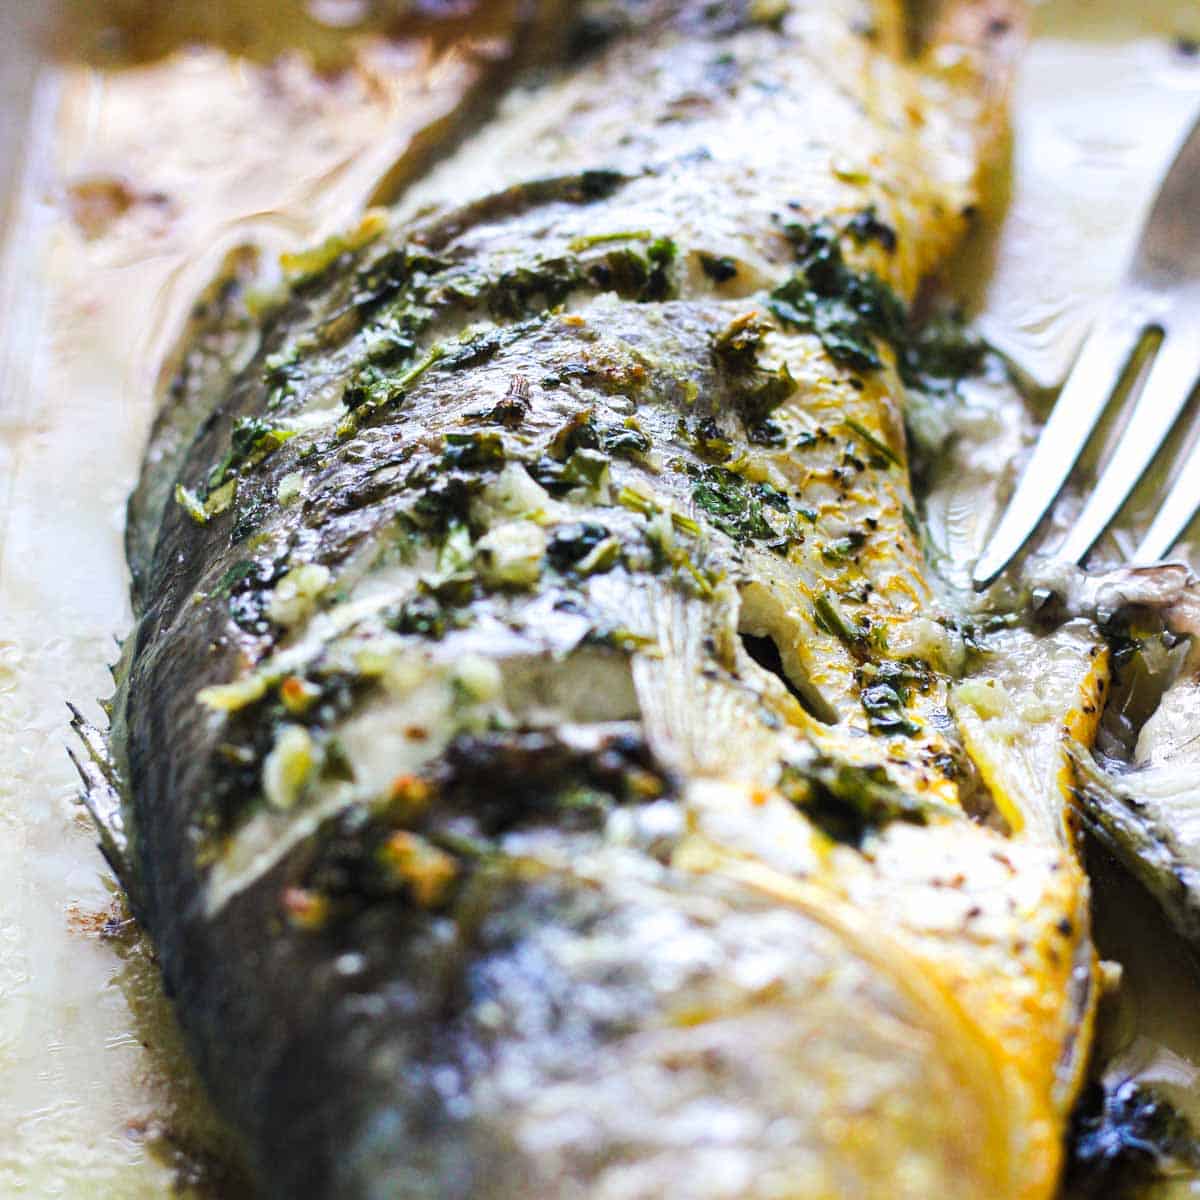 Oven baked yellow croaker recipe - The Top Meal